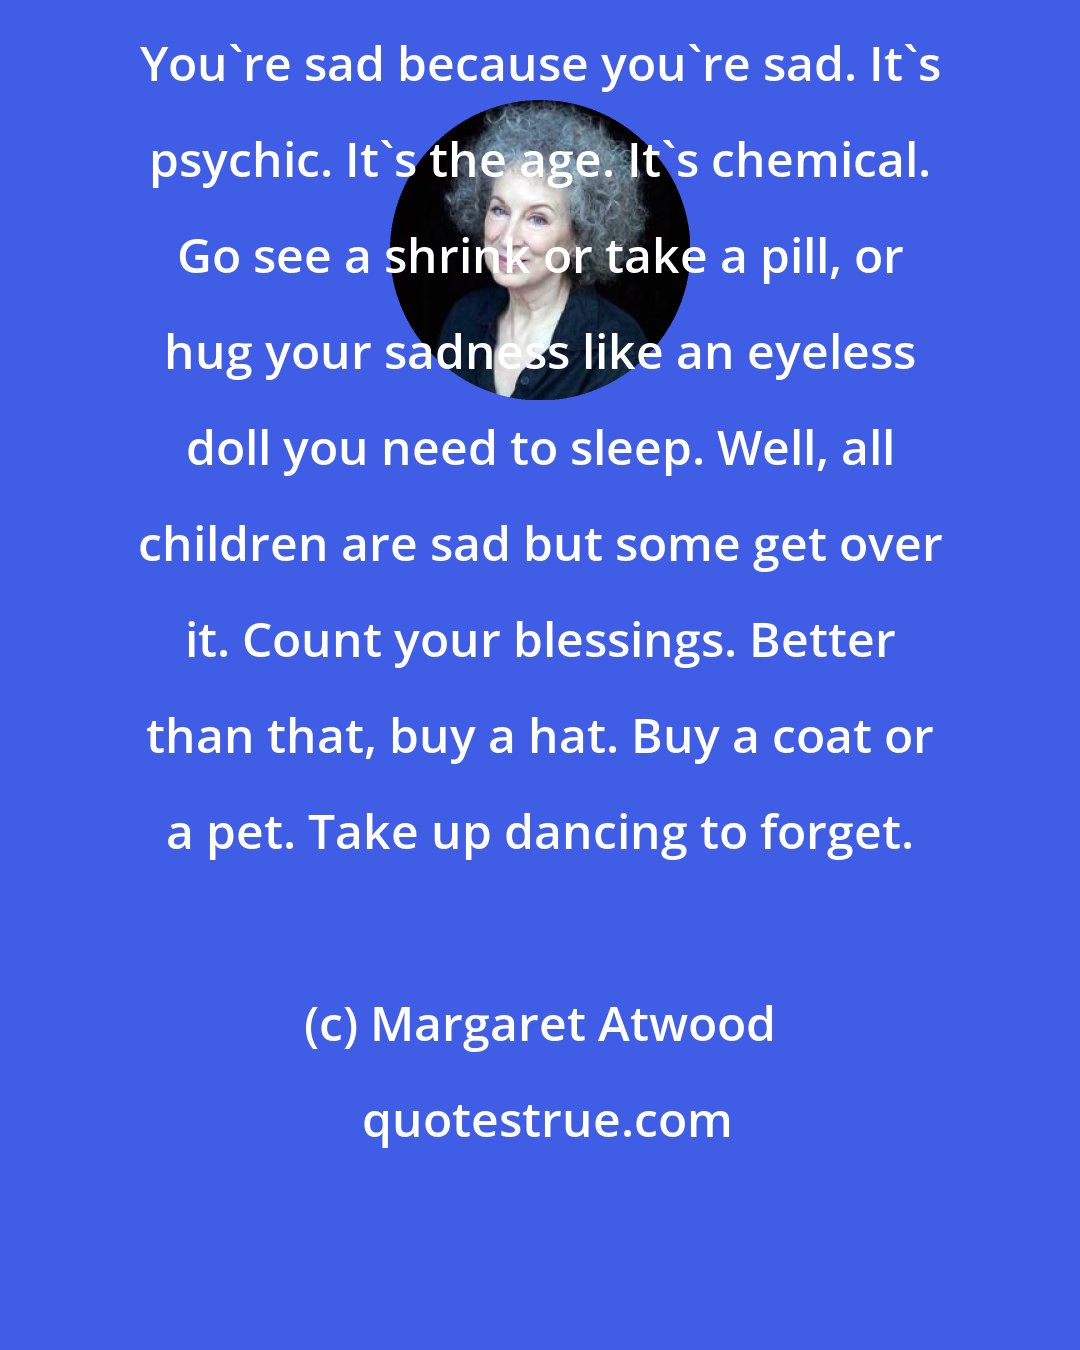 Margaret Atwood: You're sad because you're sad. It's psychic. It's the age. It's chemical. Go see a shrink or take a pill, or hug your sadness like an eyeless doll you need to sleep. Well, all children are sad but some get over it. Count your blessings. Better than that, buy a hat. Buy a coat or a pet. Take up dancing to forget.